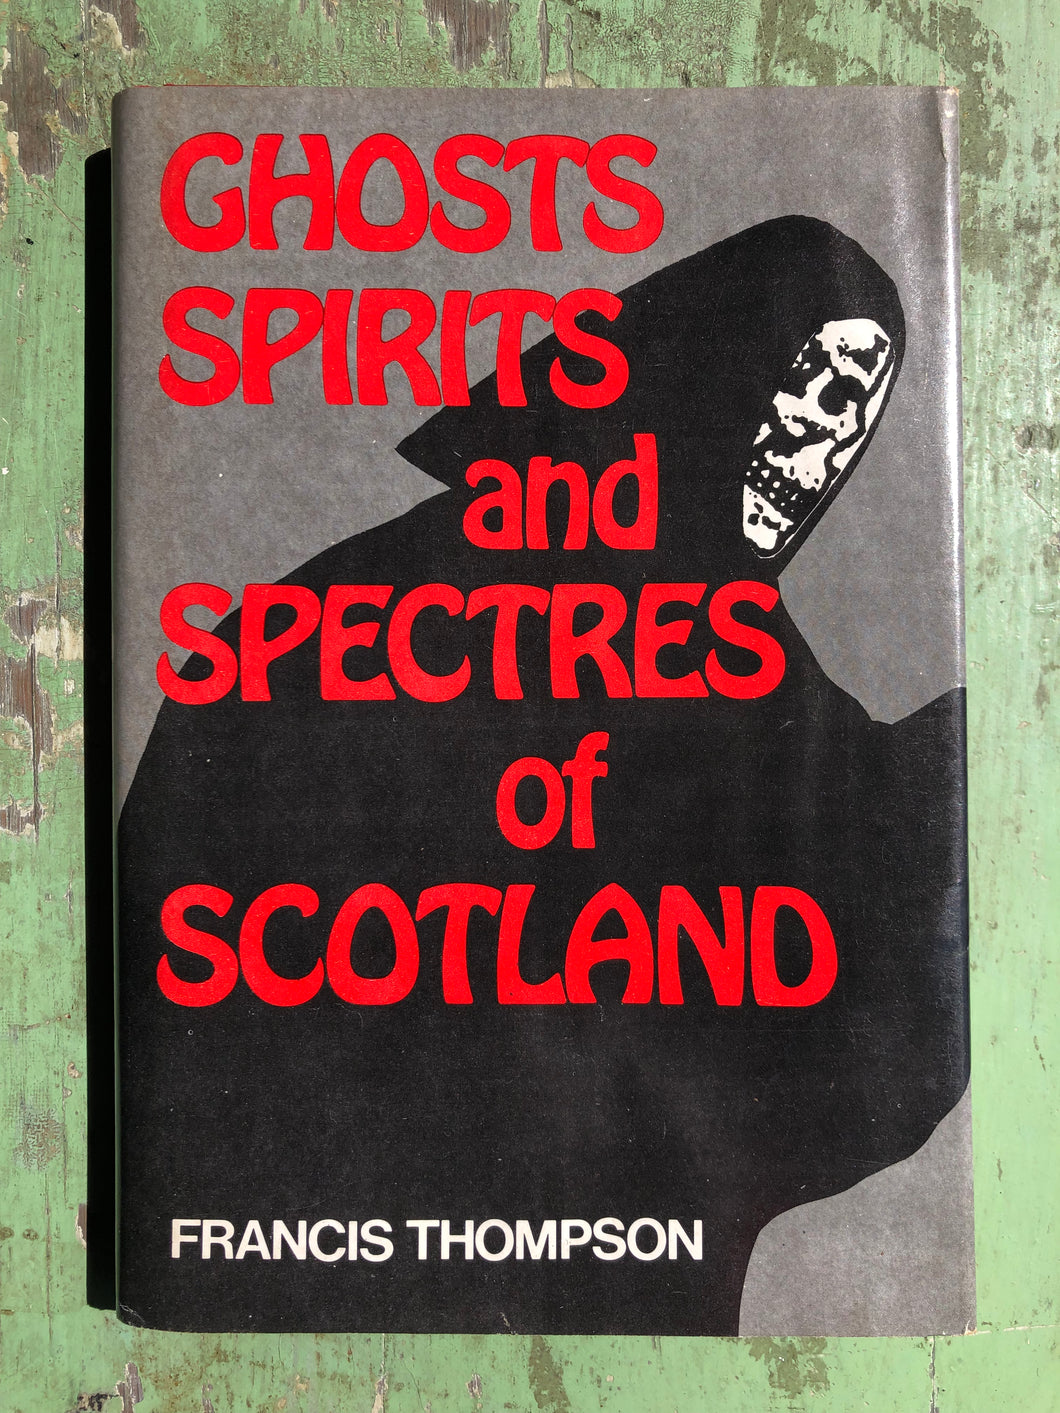 The Ghosts, Spirits and Spectres of Scotland by Francis Thompson